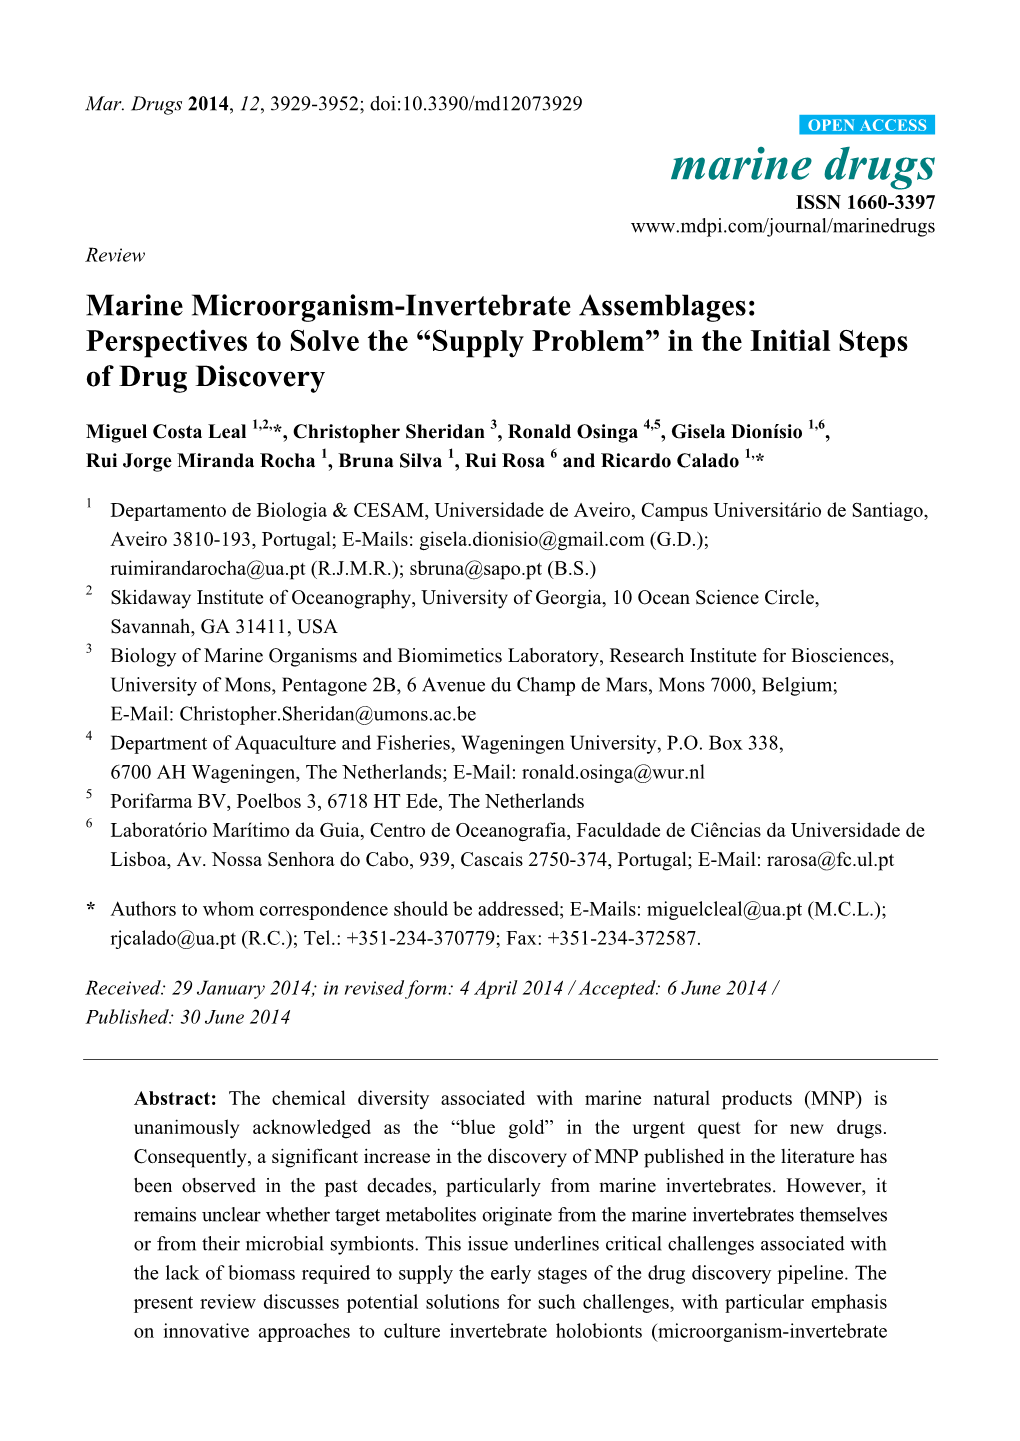 Marine Microorganism-Invertebrate Assemblages: Perspectives to Solve the “Supply Problem” in the Initial Steps of Drug Discovery